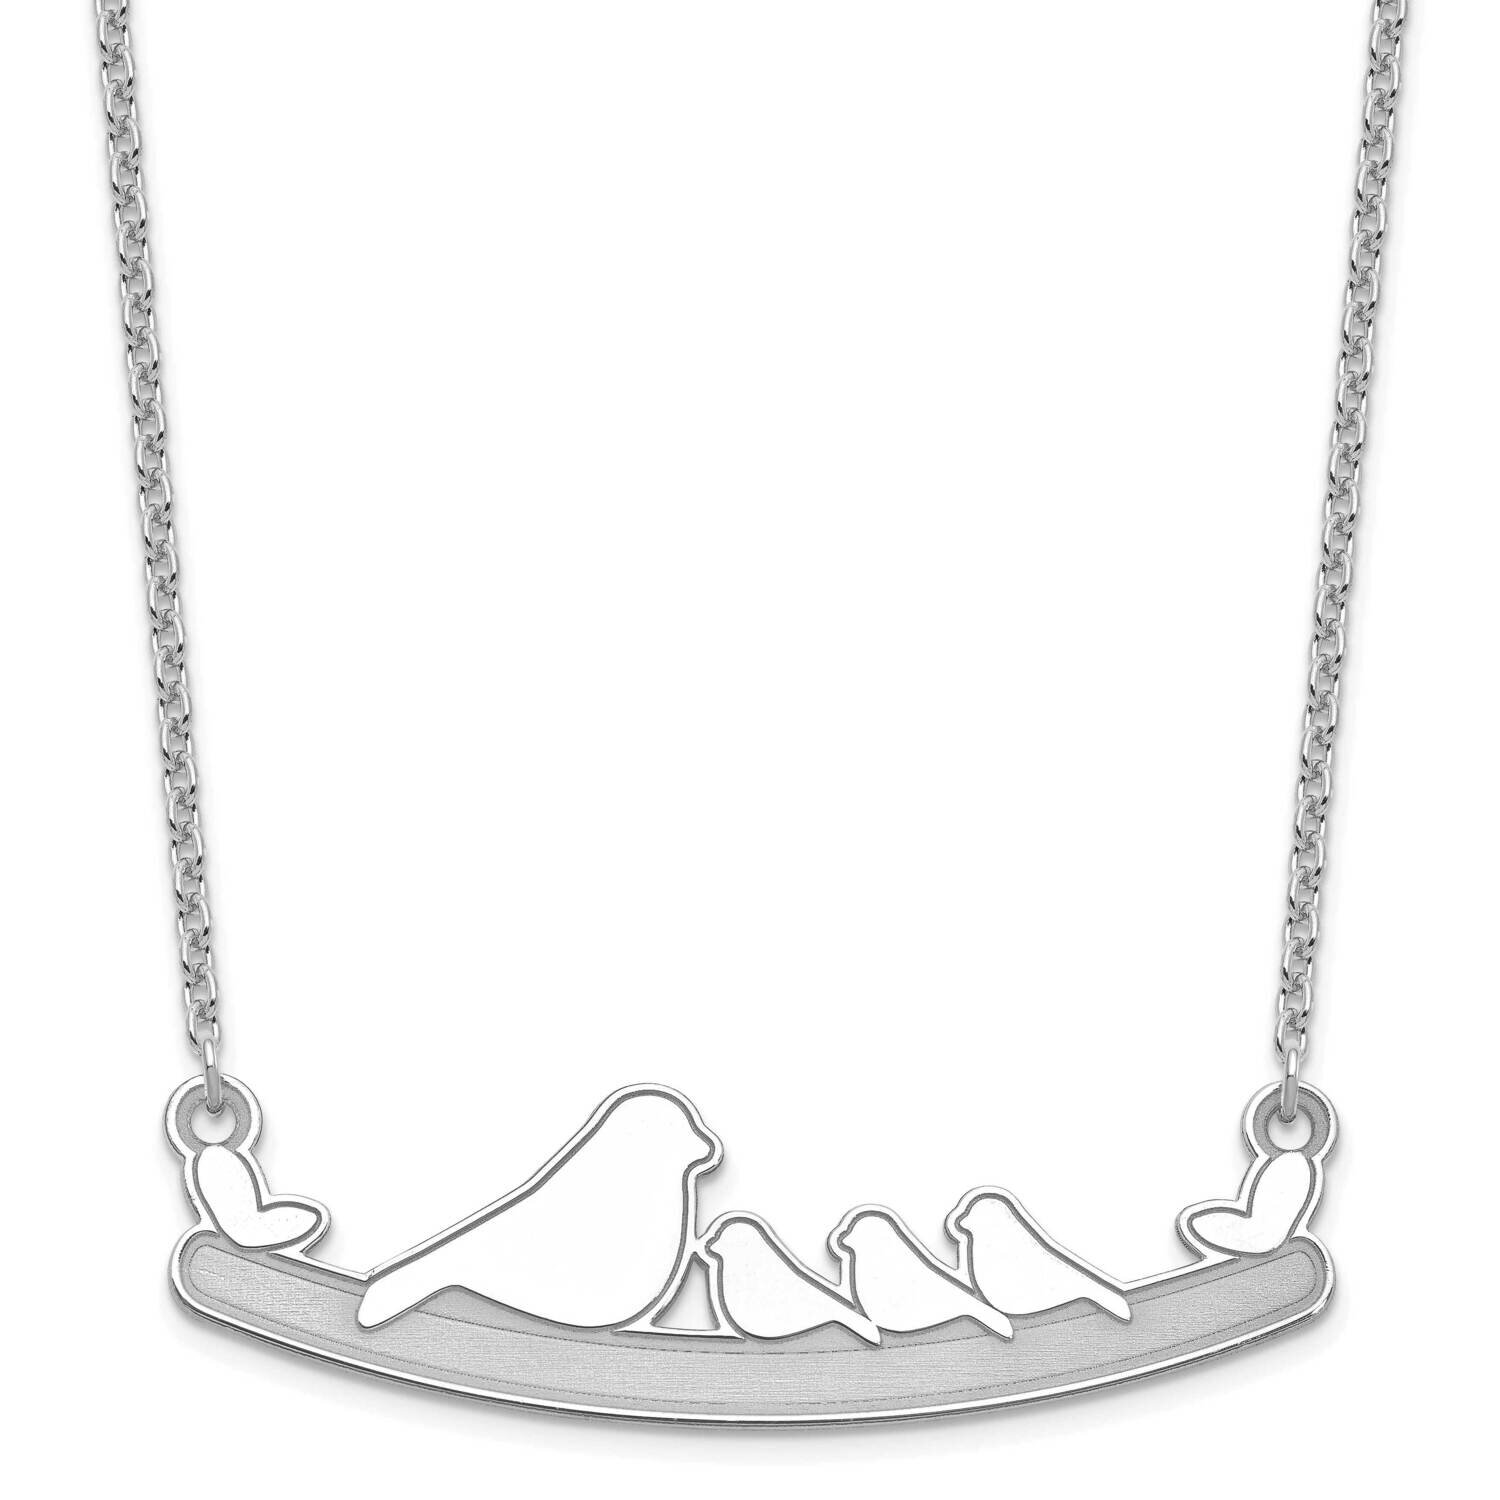 3 Children Bird Family Necklace Sterling Silver XNA675SS